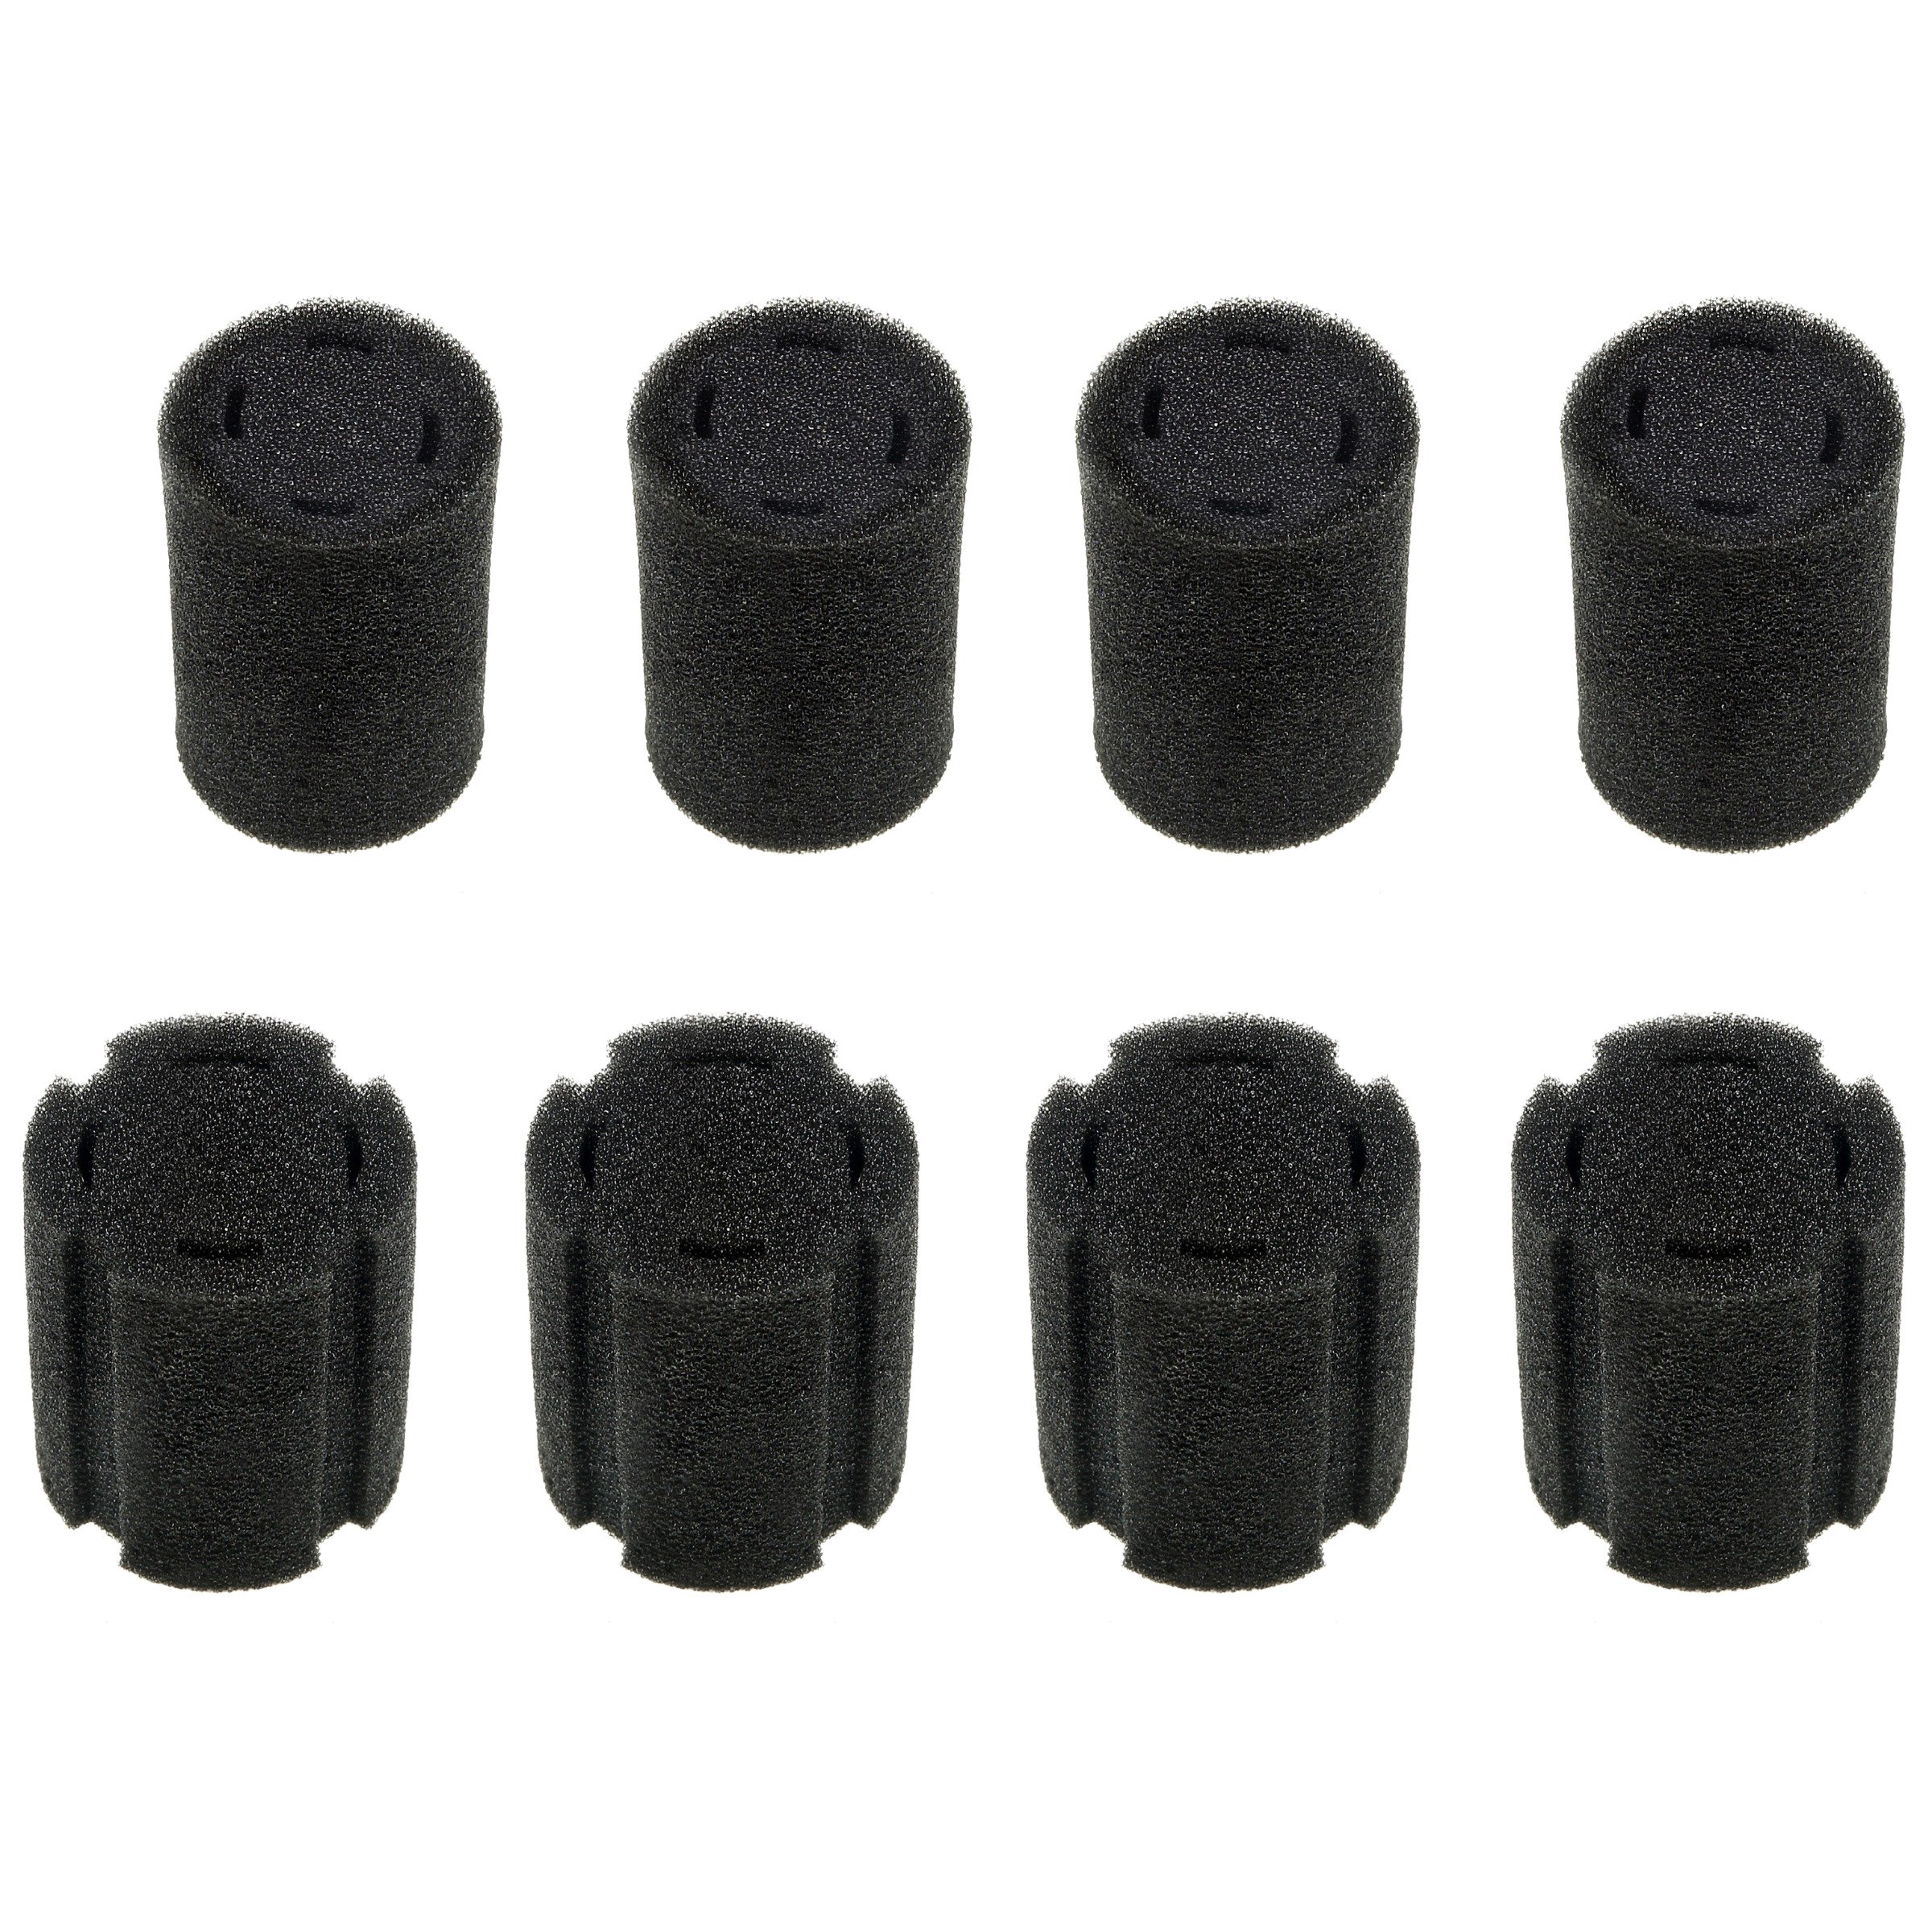 Lug Nut Cleaner Sponge 8-pack Replacement